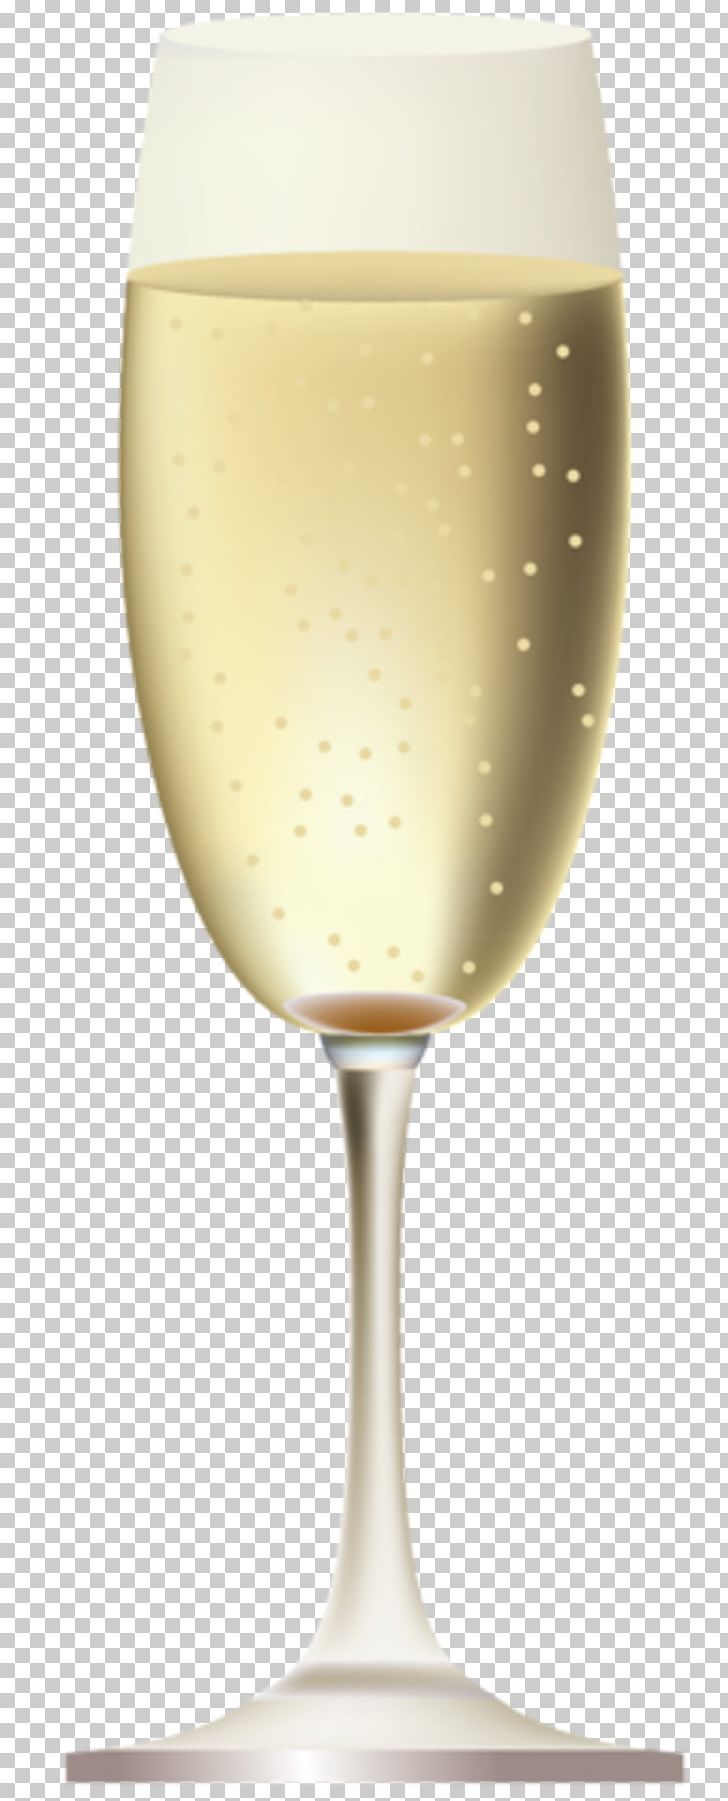 Champagne Glass Sparkling Wine White Wine Portable Network Graphics PNG, Clipart, Alcoholic Drink, Beer Glass, Bottle, Champagne, Champagne Glass Free PNG Download